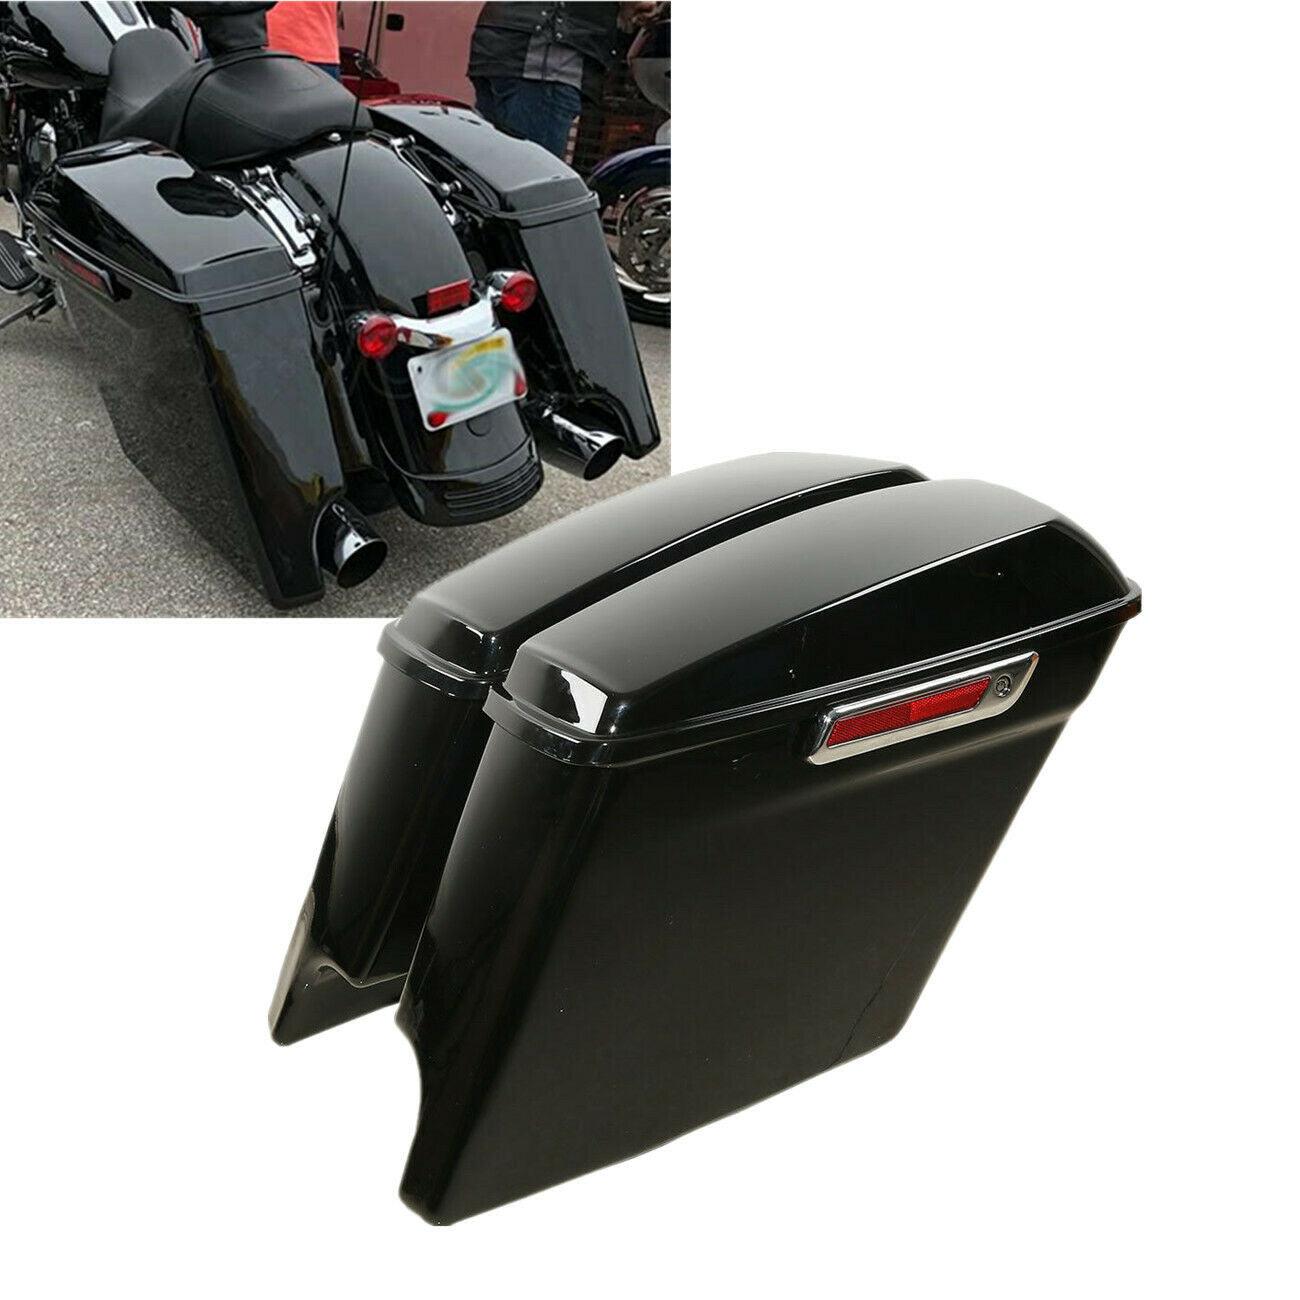 5" Stretched Saddle Bags Saddlebags For Harley Street Road Glide 2014-2022 2019 - Moto Life Products